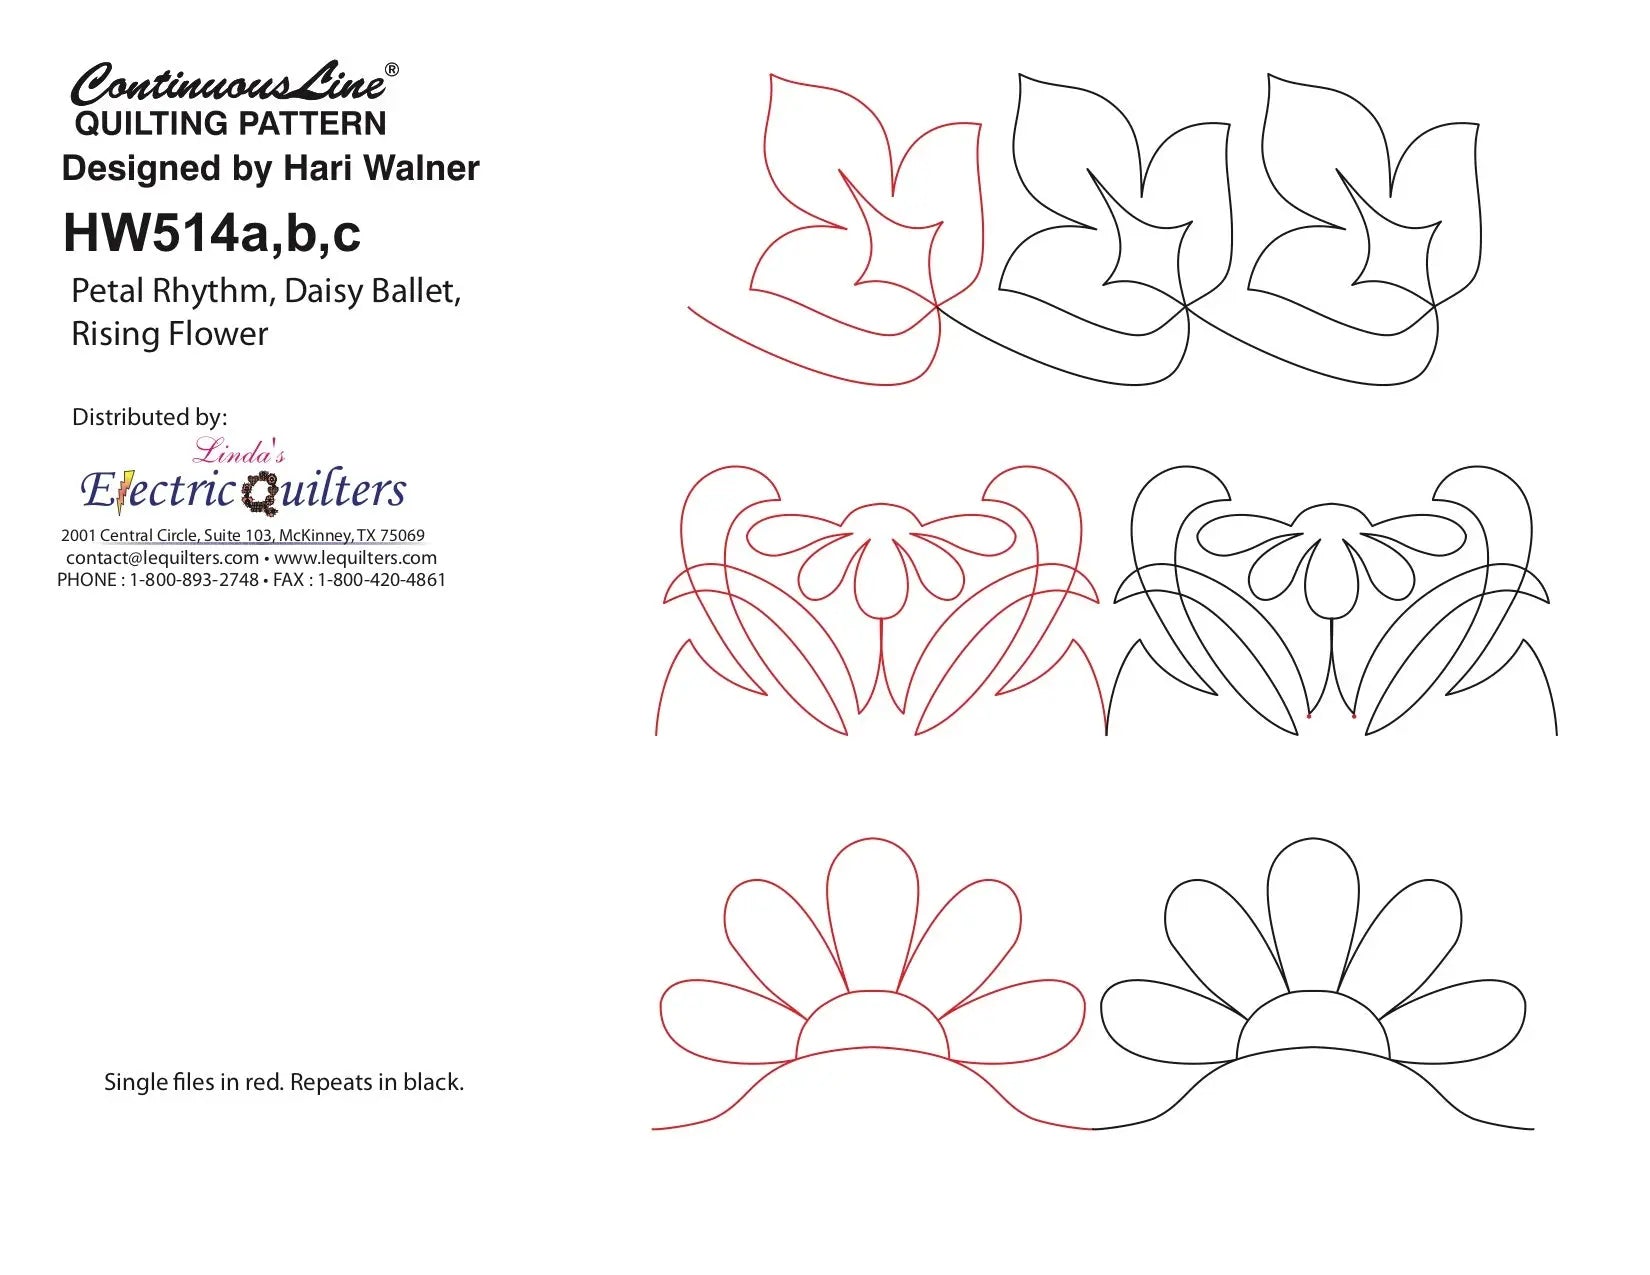 514 Floral 3 Pantograph by Hari Walner - Linda's Electric Quilters